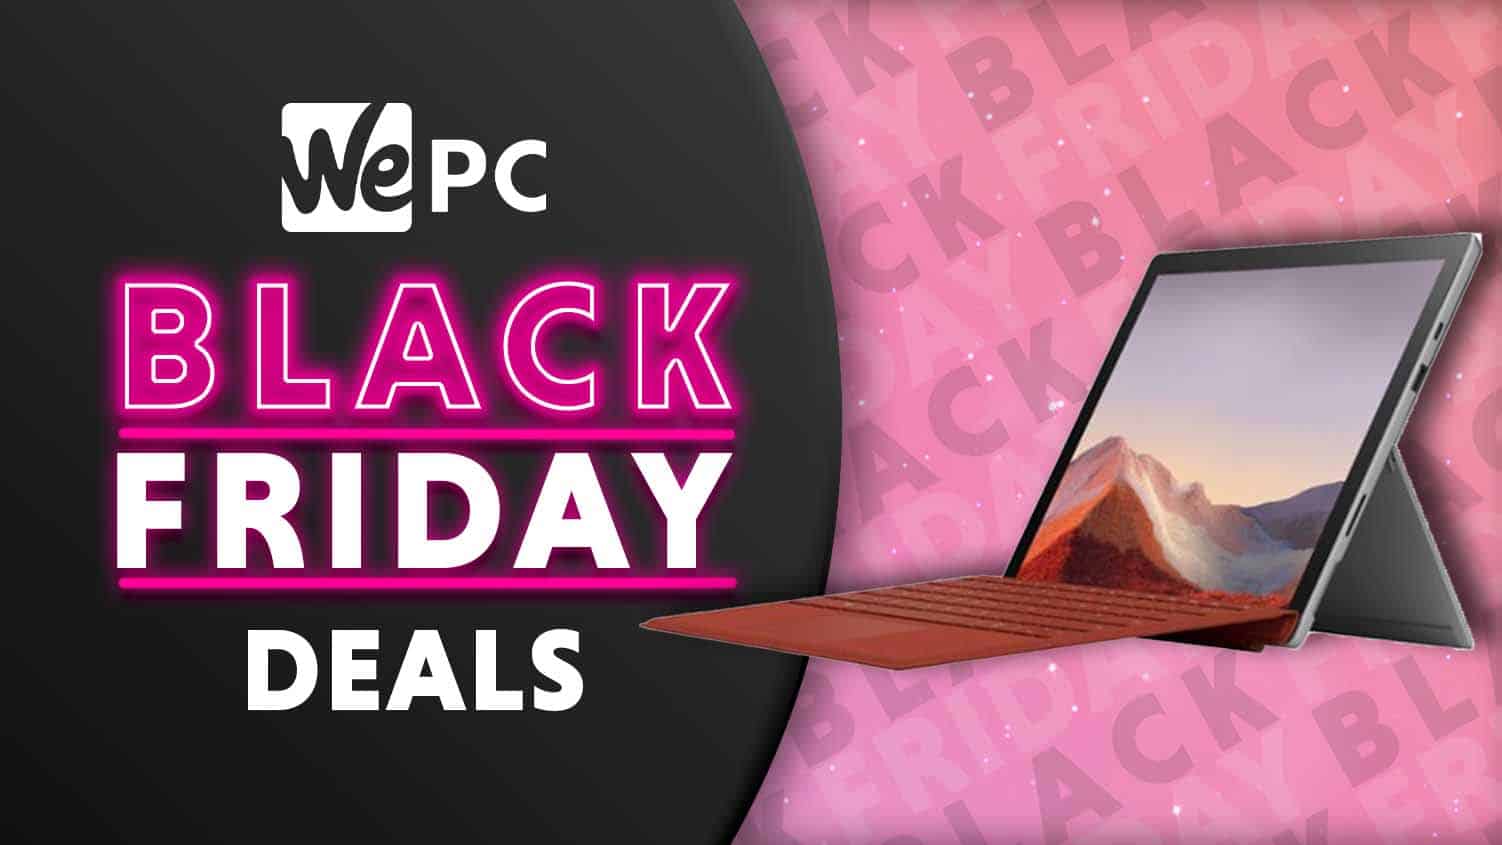 Get $400 off the Microsoft Surface Pro 7 platinum early Black Friday deal